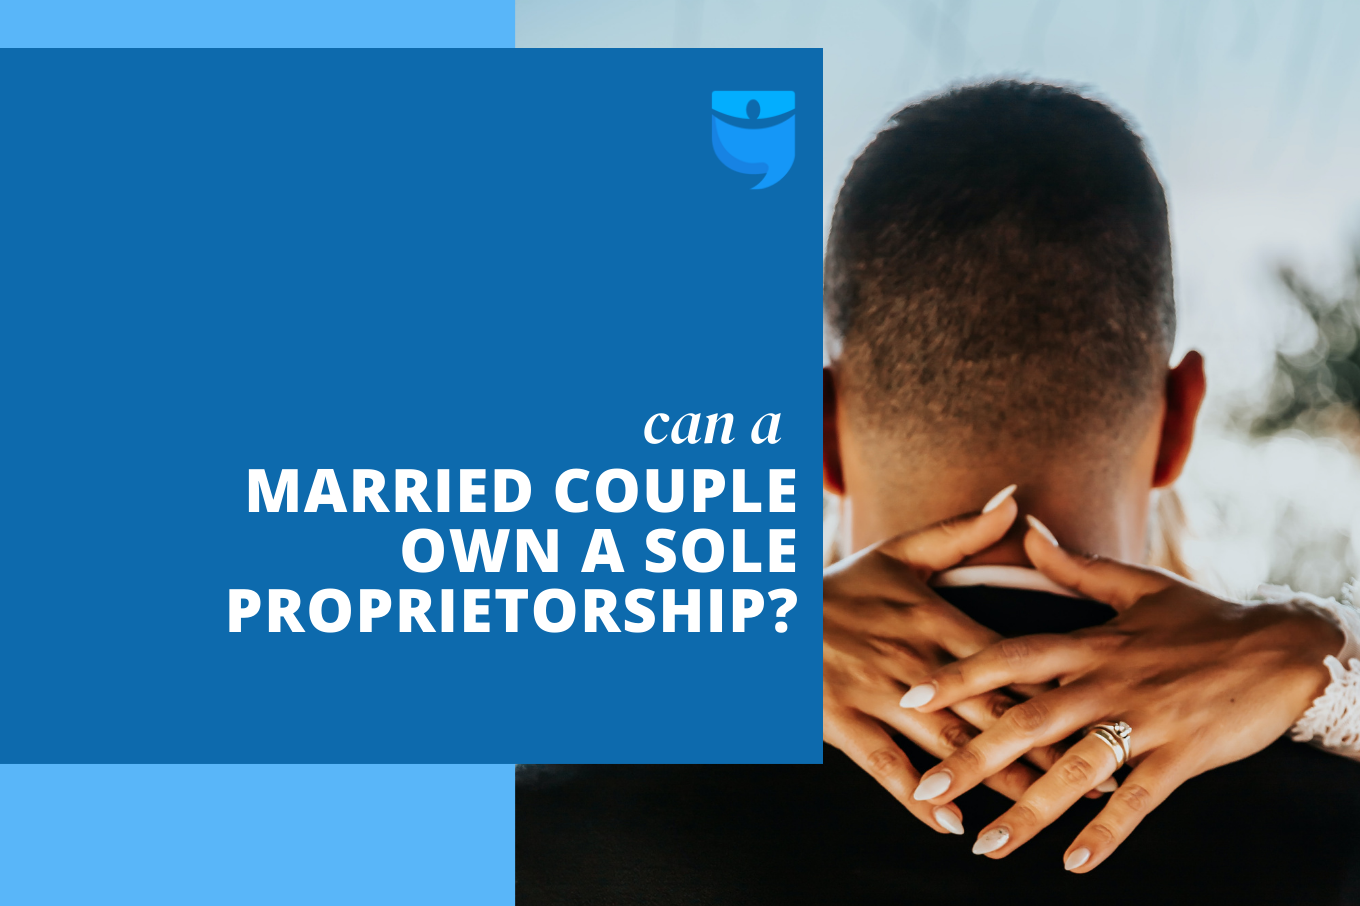 One Is the Loneliest Number: Owning a Sole Proprietorship With Your Spouse